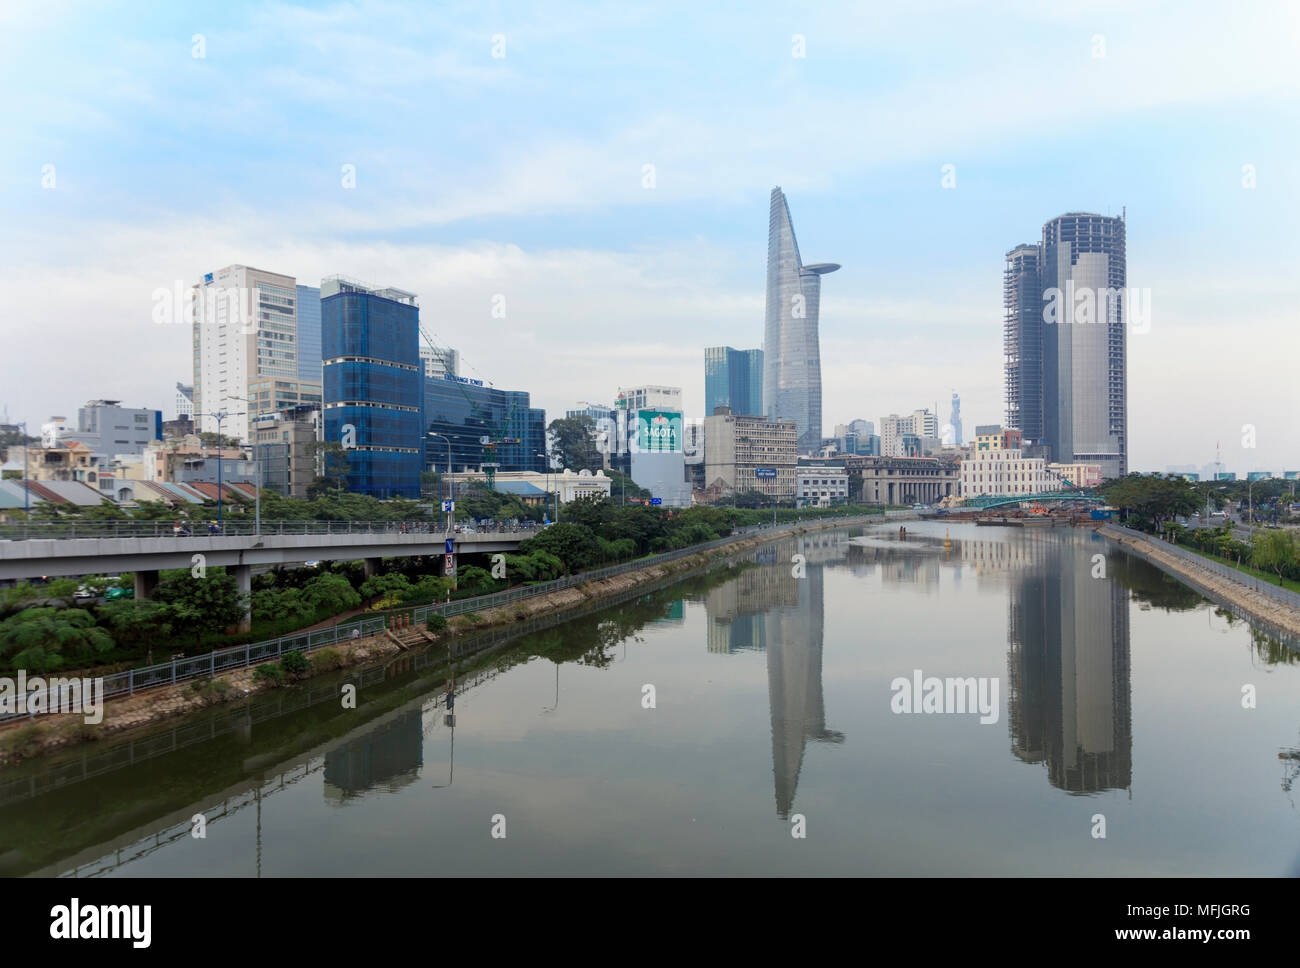 The view of the Bitexco Tower in Ho Chi Minh City (Saigon) centre and a canal off the Saigon River, Vietnam, Indochina, Southeast Asia, Asia Stock Photo